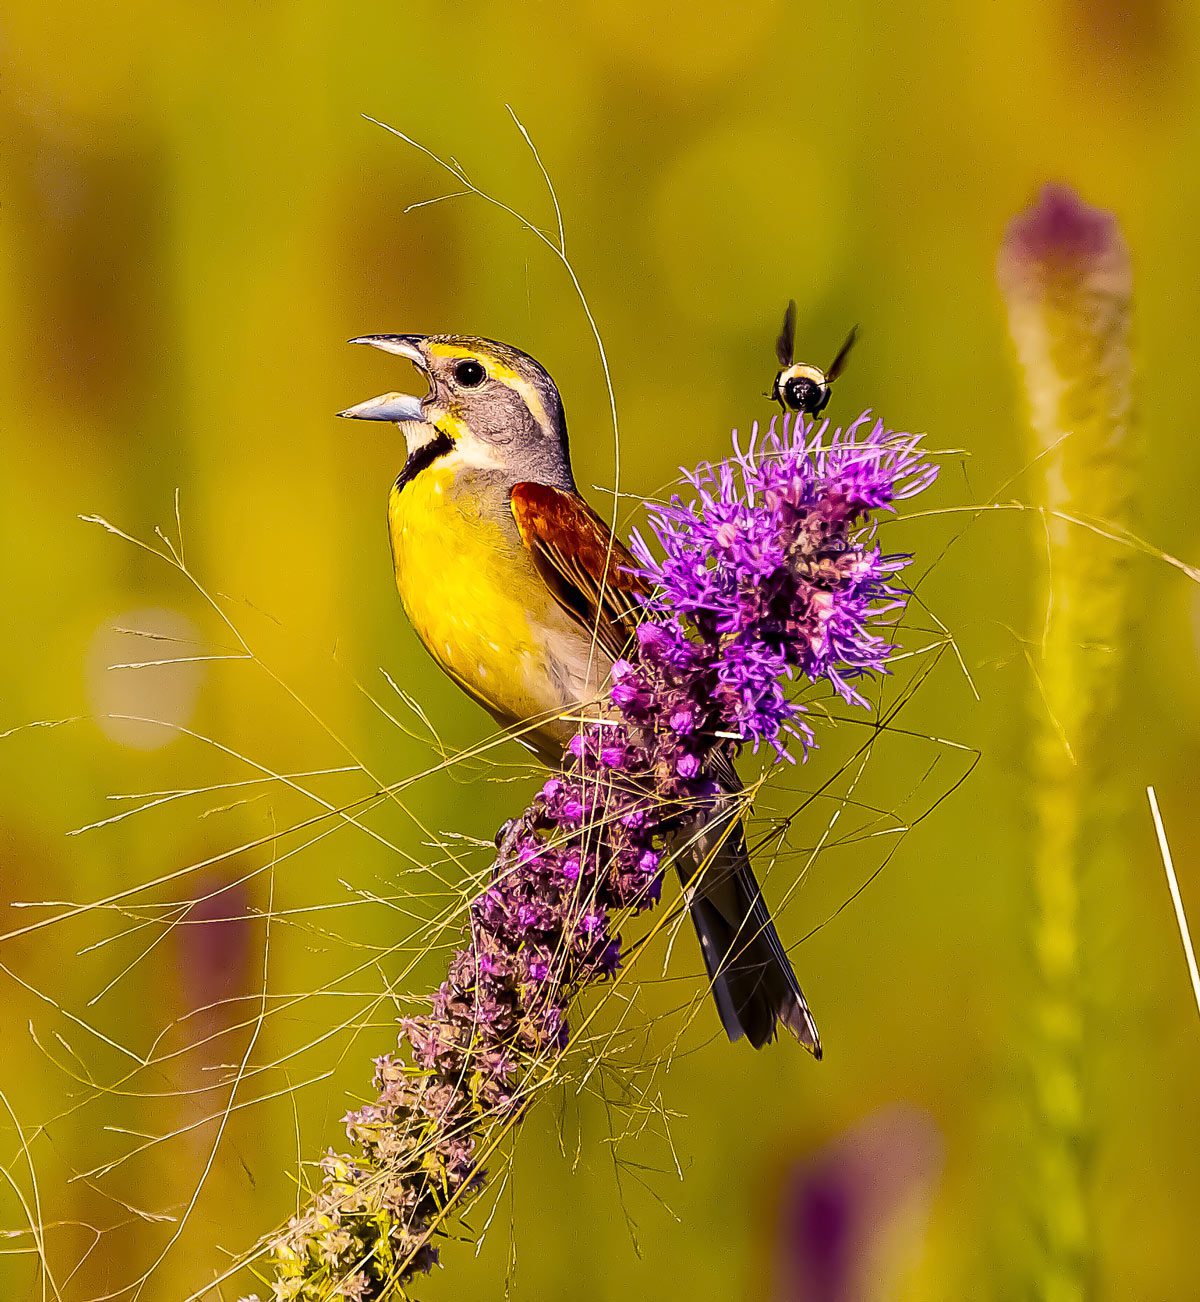 A Dickcissel perched and singing on a prairie blazing star next to a foraging bumblebee. Photo by Michael Vance Pemberton.